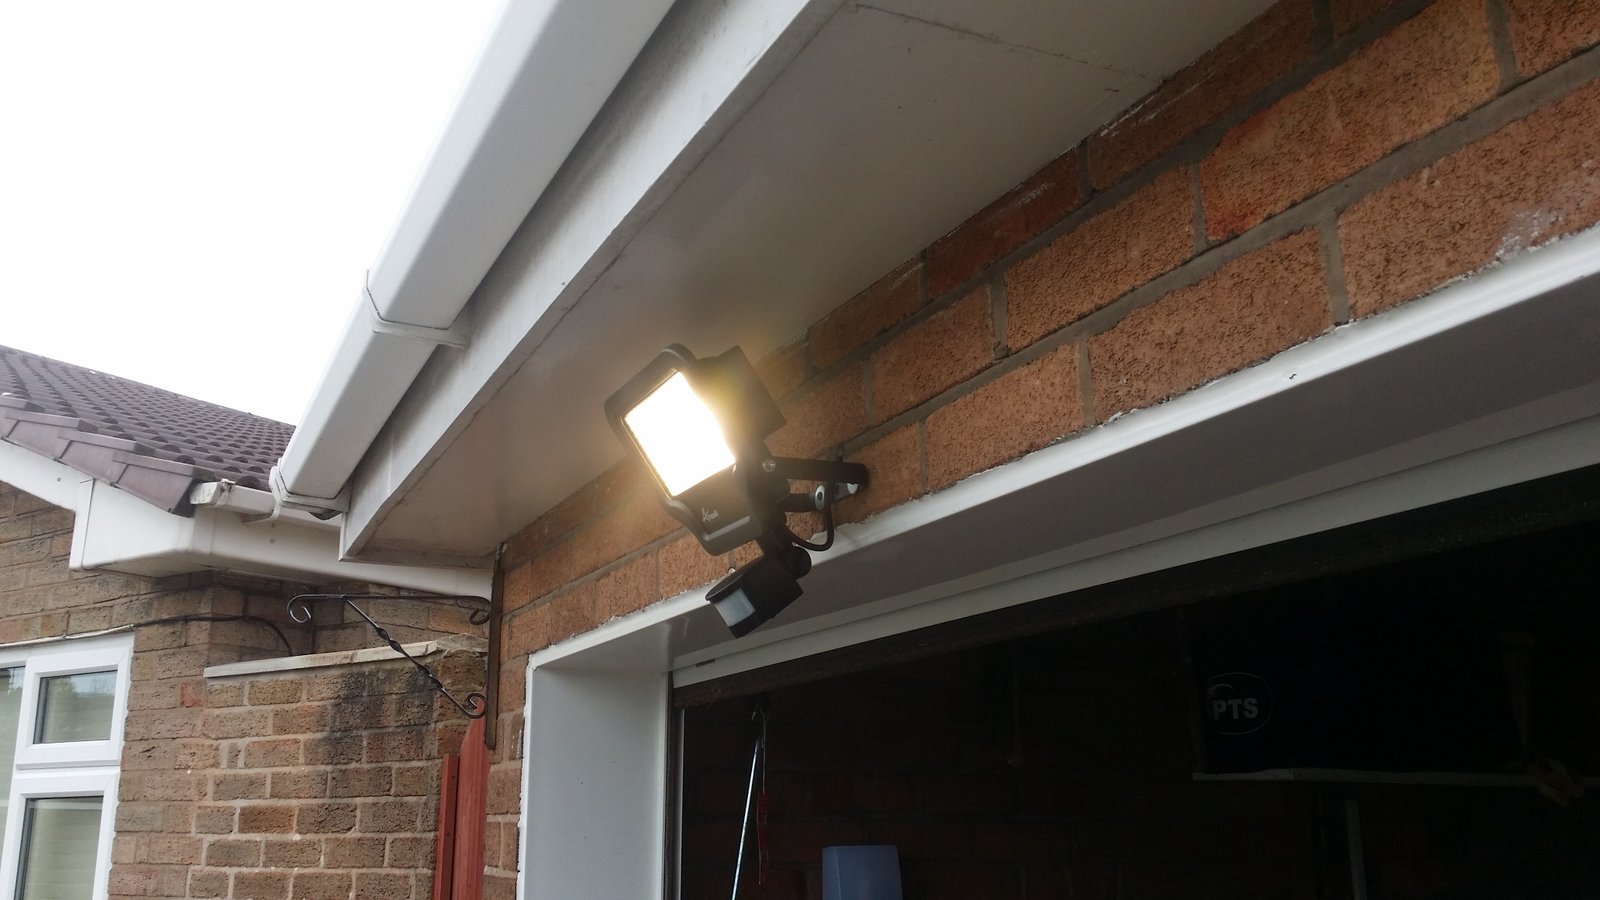 Work completed by RHIAES on a outdoor light